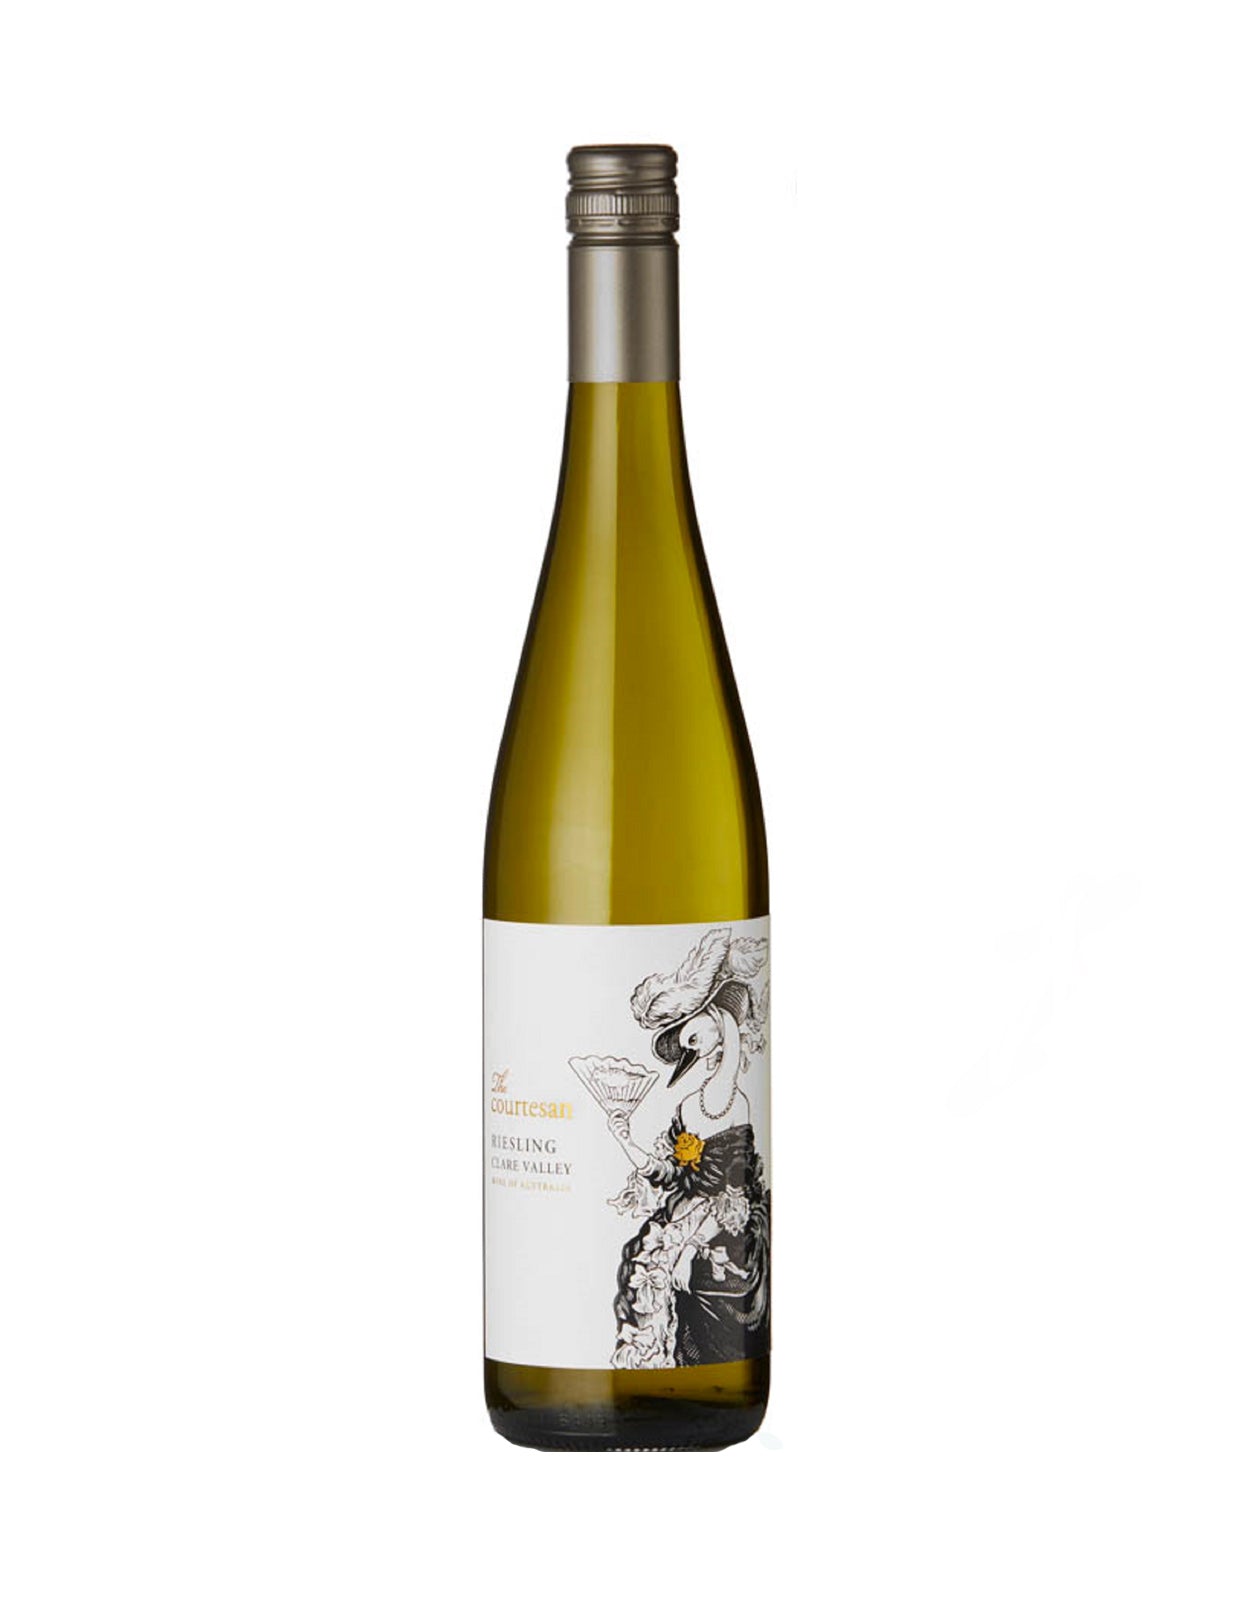 The Courtesan Riesling Clare Valley